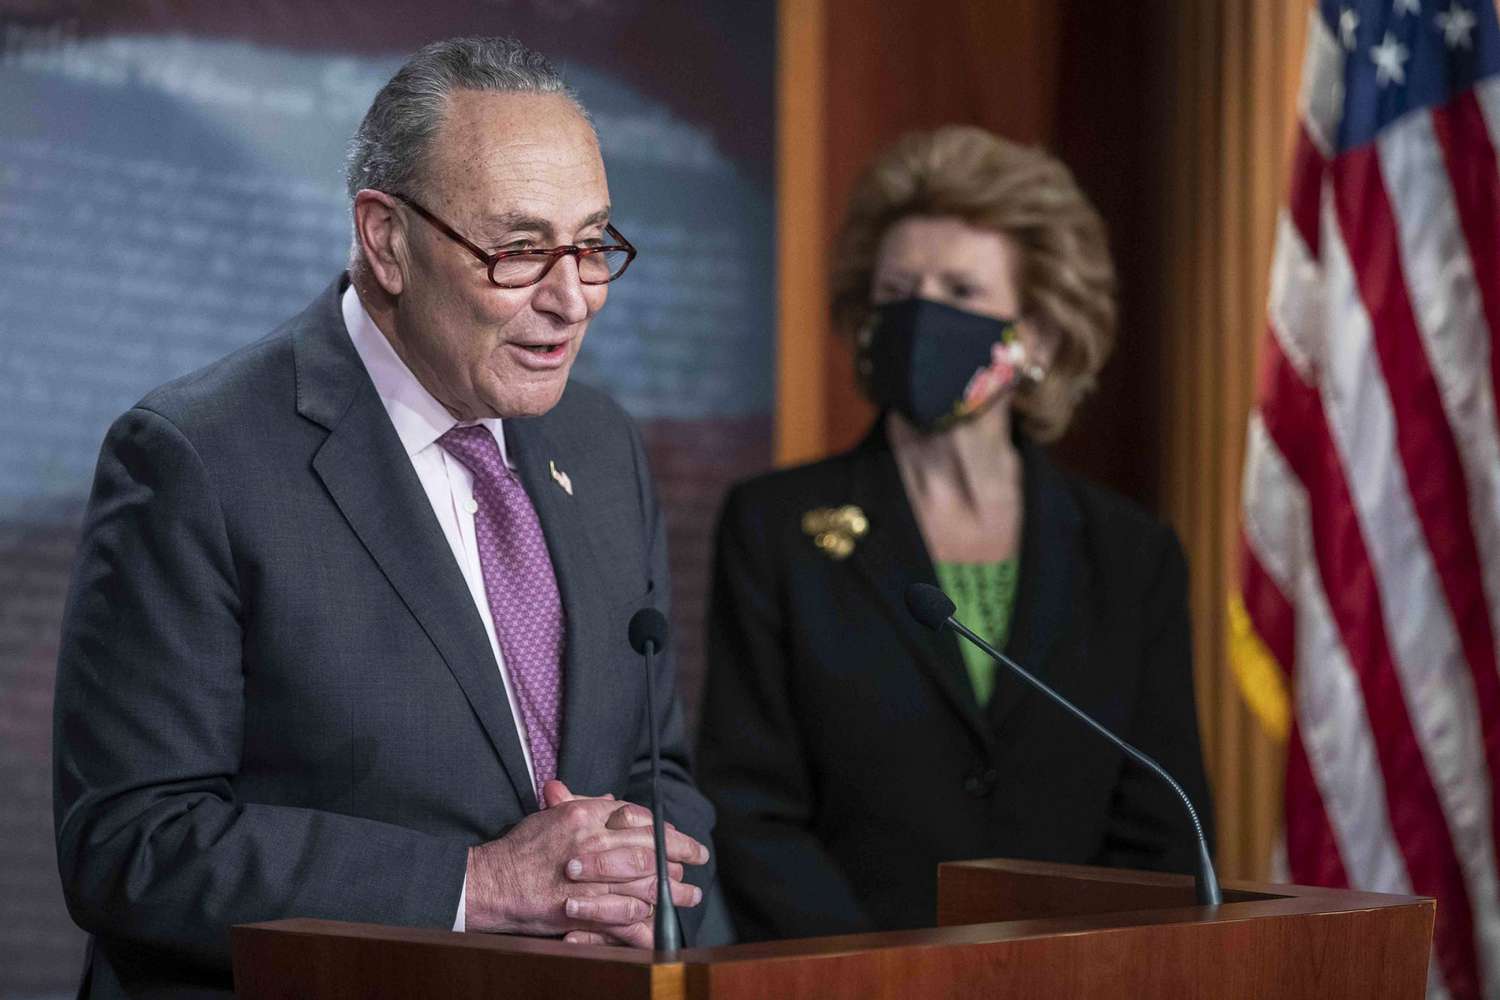 Senate Majority Leader Chuck Schumer delivers remarks during a press conference following the Senate Democratic policy luncheon in the US Capitol in Washington, DC, USA 02 March 2021